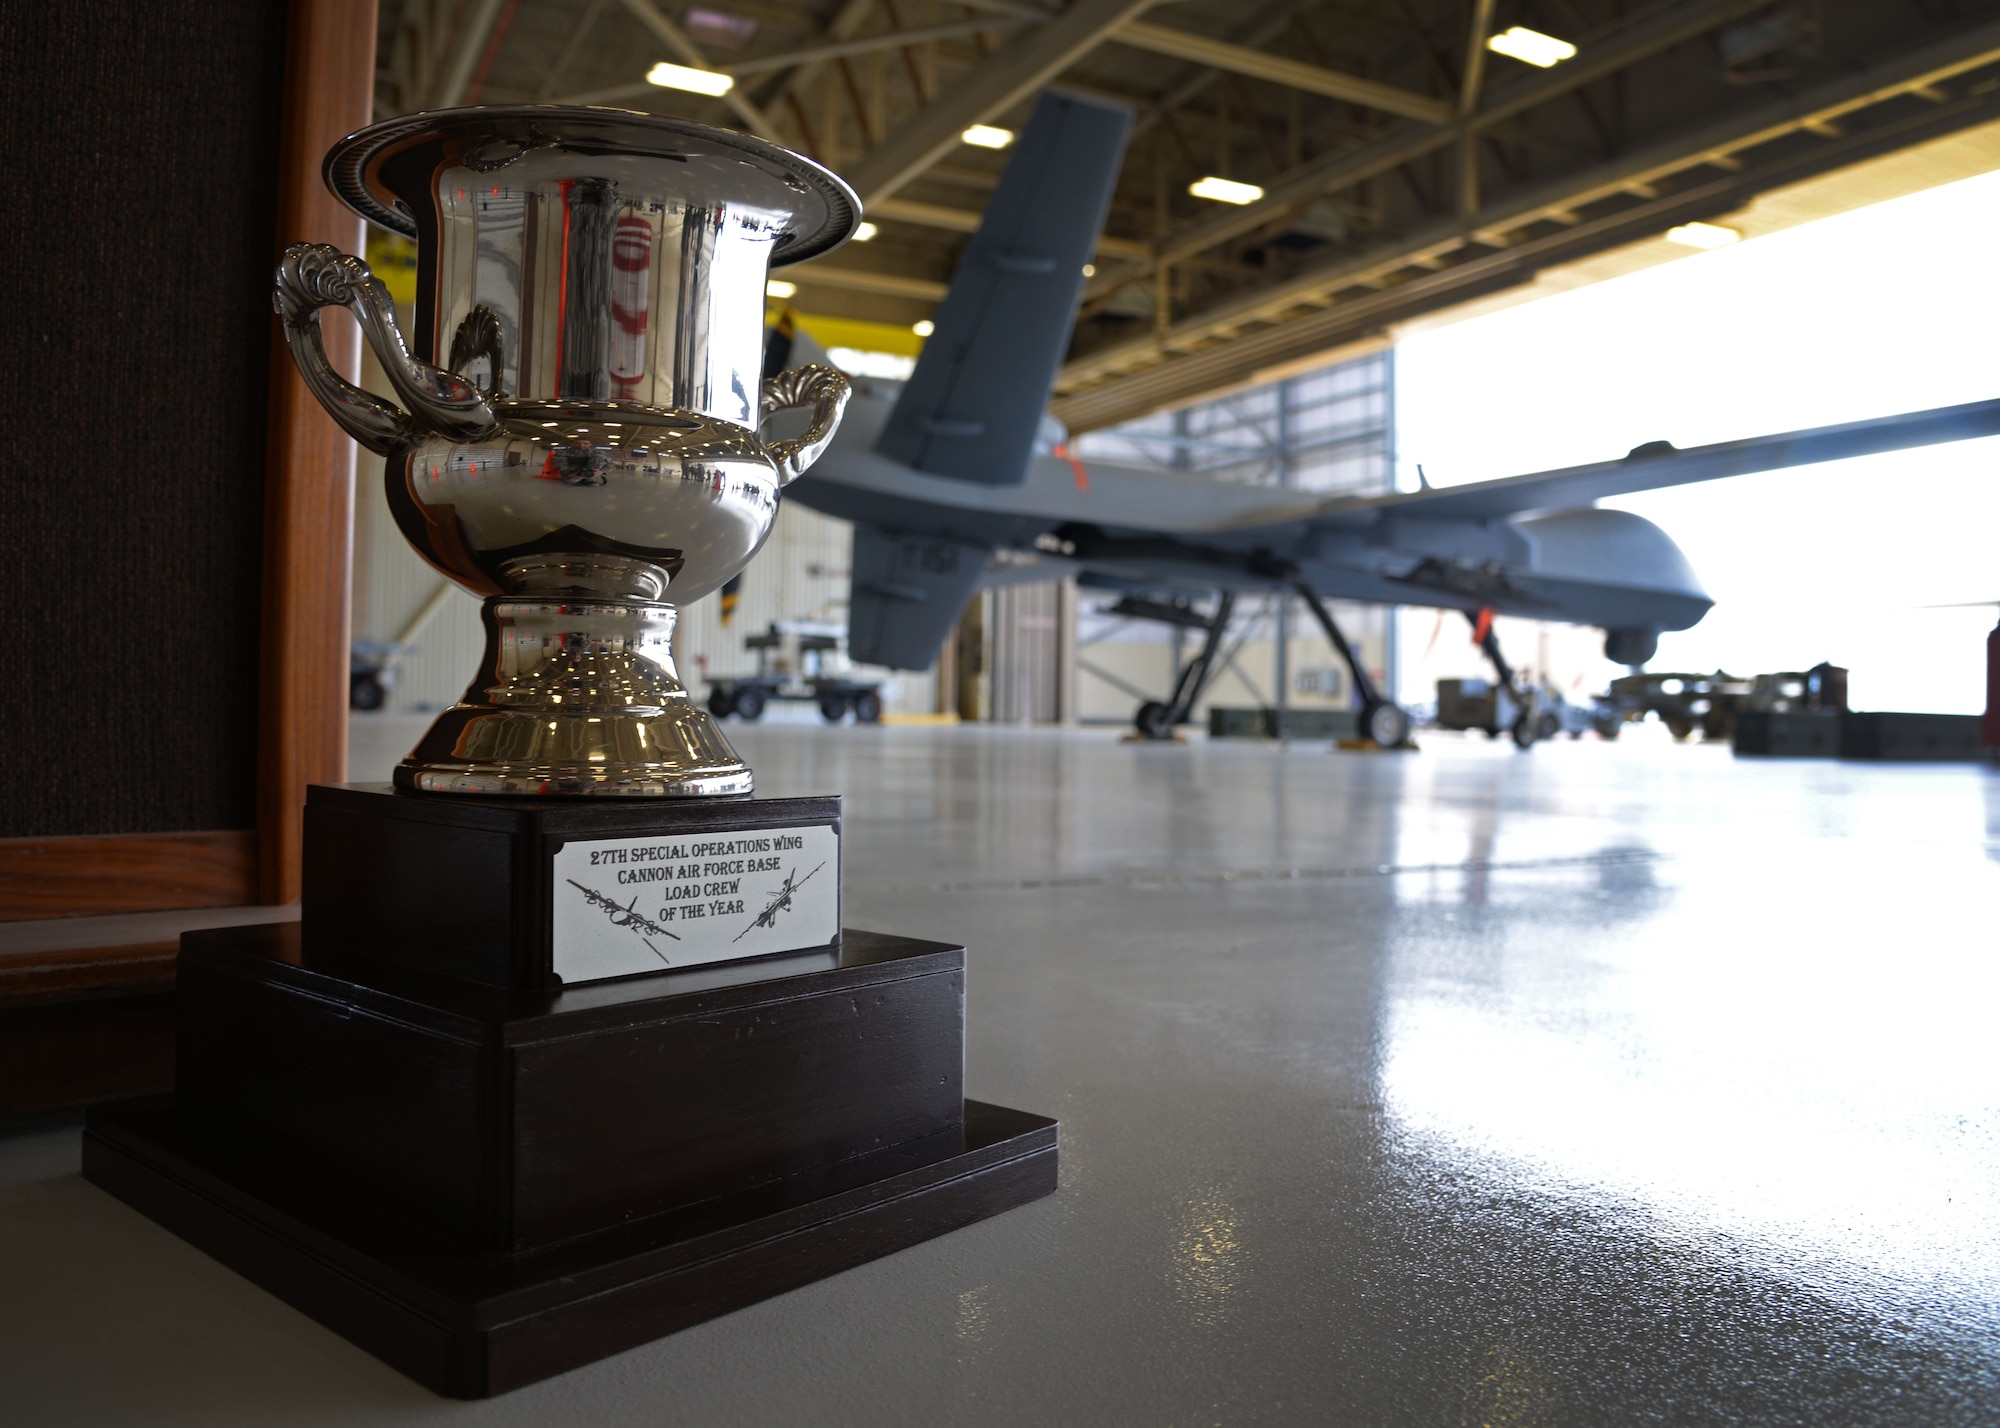 The 27th Special Operations Wing load crew of the year trophy is displayed near competition grounds April 6, 2015 at Cannon Air Force Base, N.M. Cannon’s weapons troops gathered for the first ever load competition in Air Force Special Operations Command history. (U.S. Air Force photo/Staff Sgt. Alex Mercer)